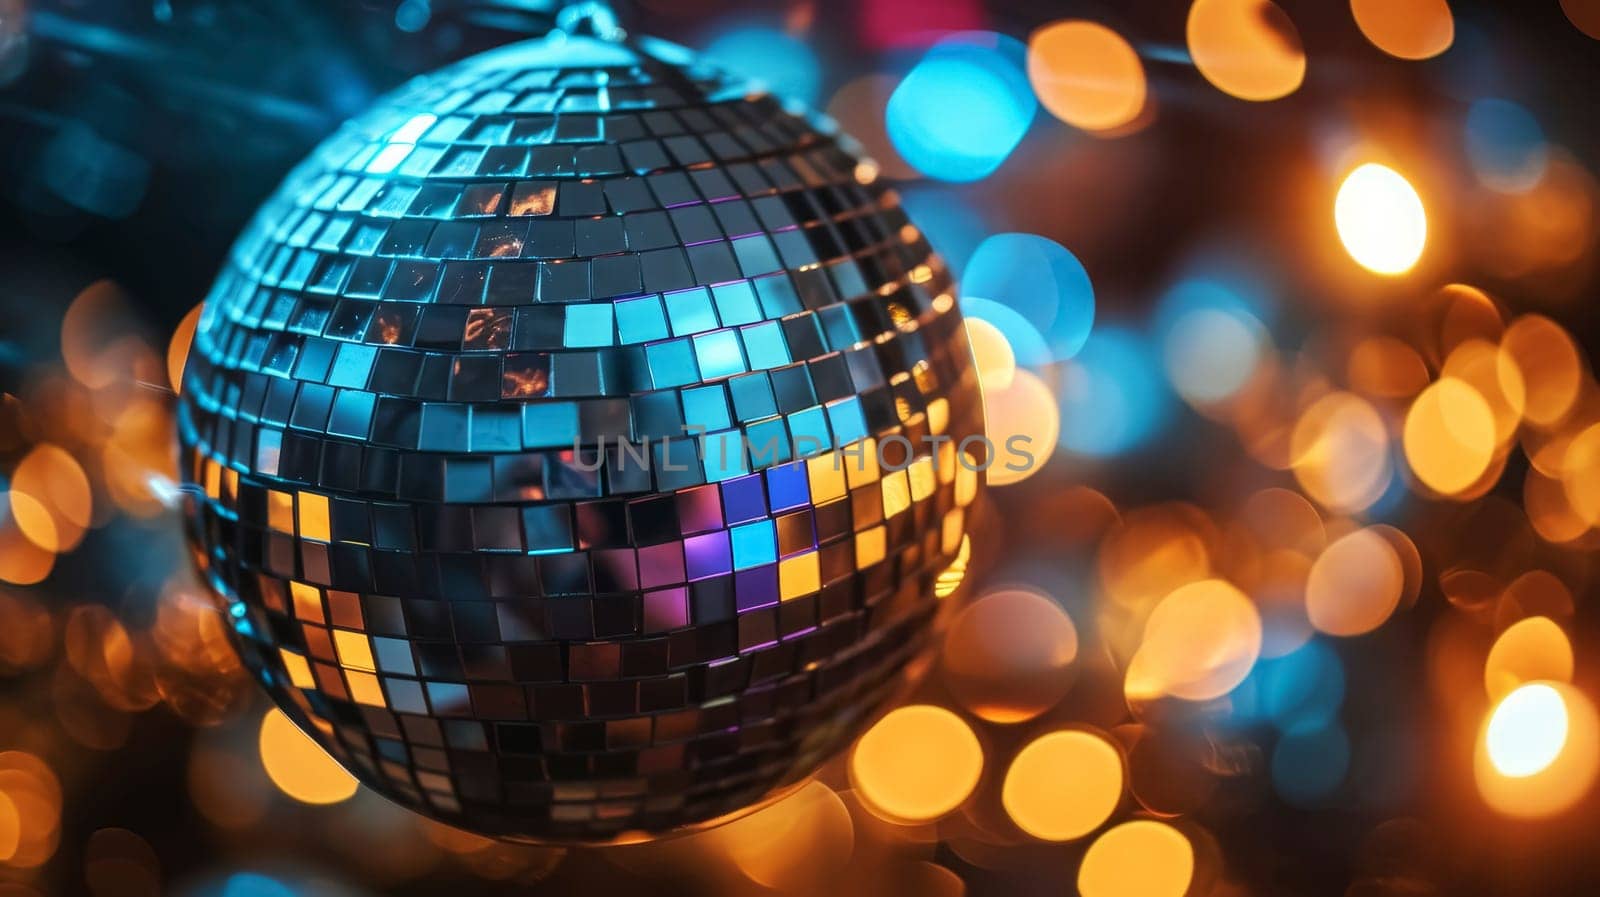 Disco ball with sparkling reflections. Close-up shot with colorful bokeh background. Party and celebration concept. Design for invitation, event poster, greeting card. Place for text